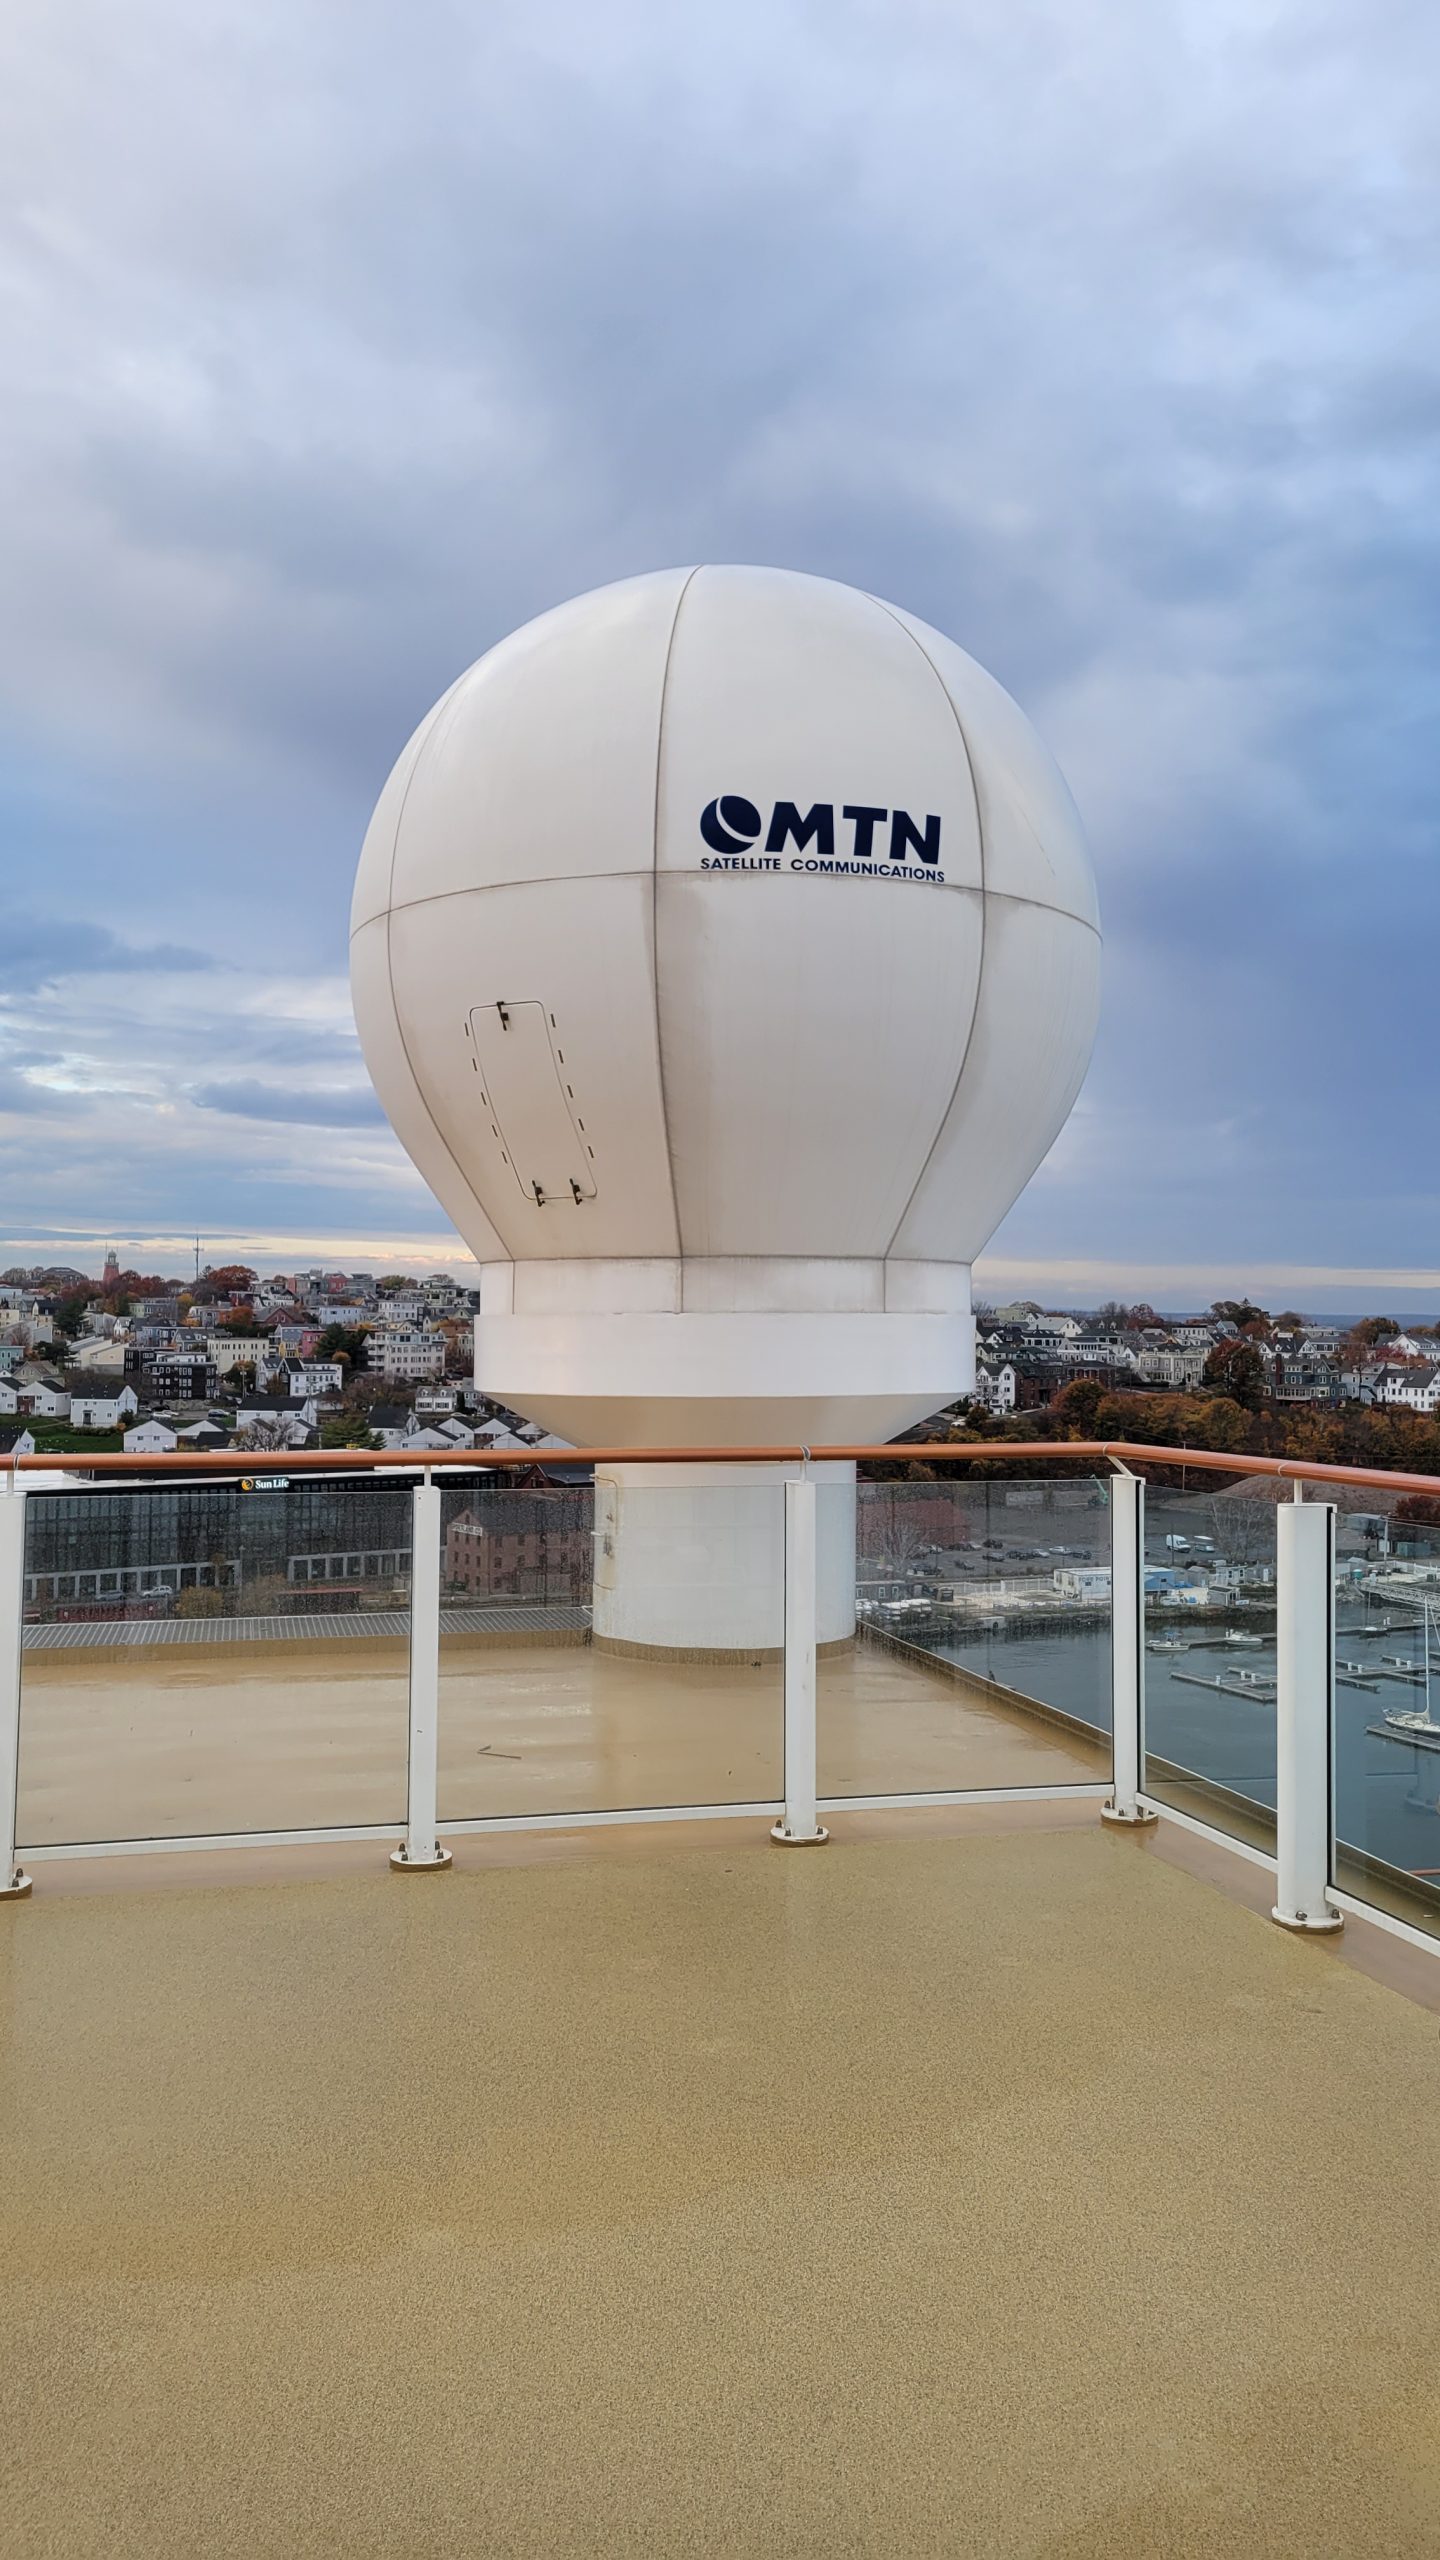 11 Starlink dishes spotted on a Norwegian Breakaway cruise 16